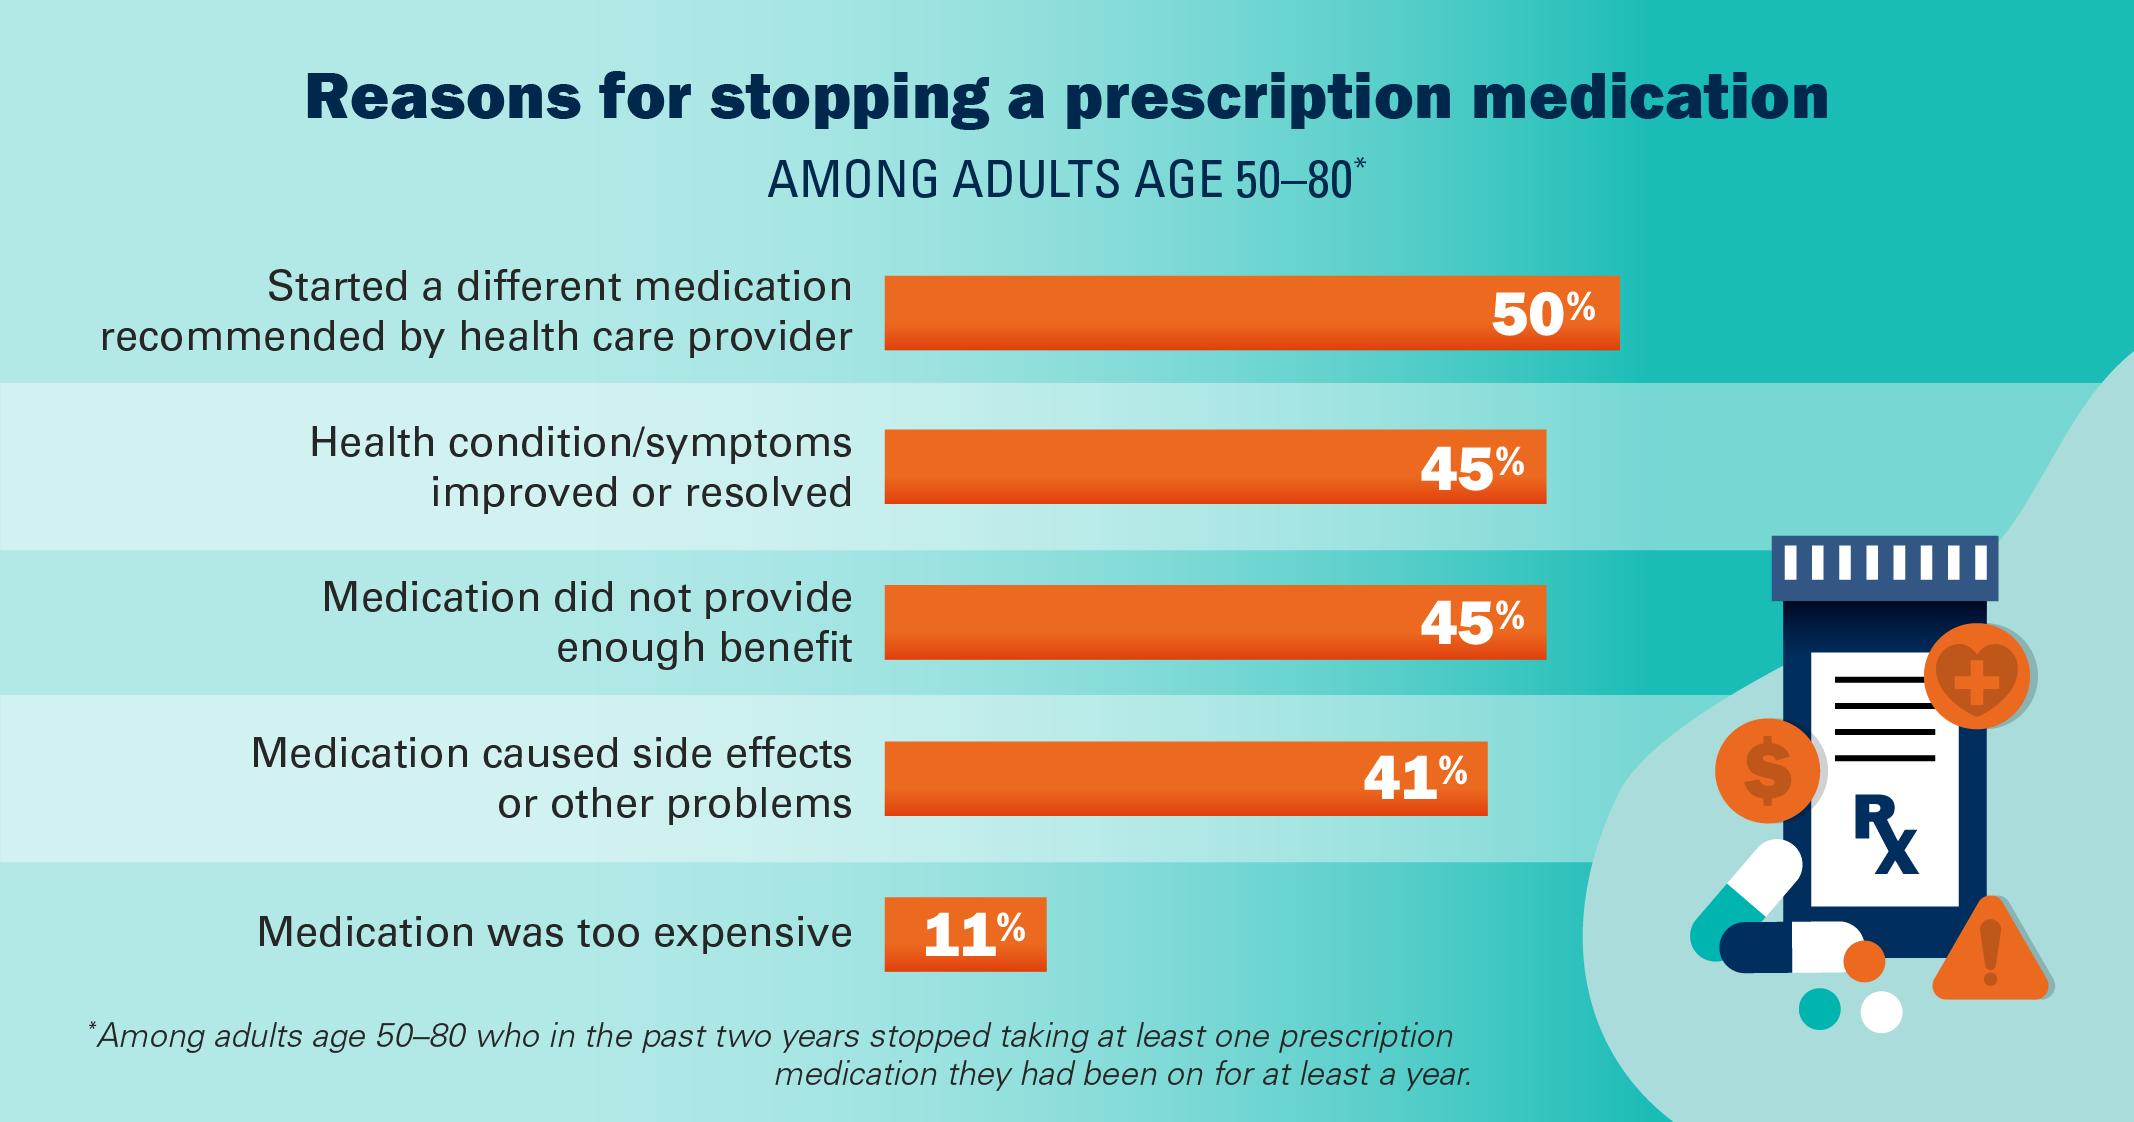 Reasons for stopping a prescription medication